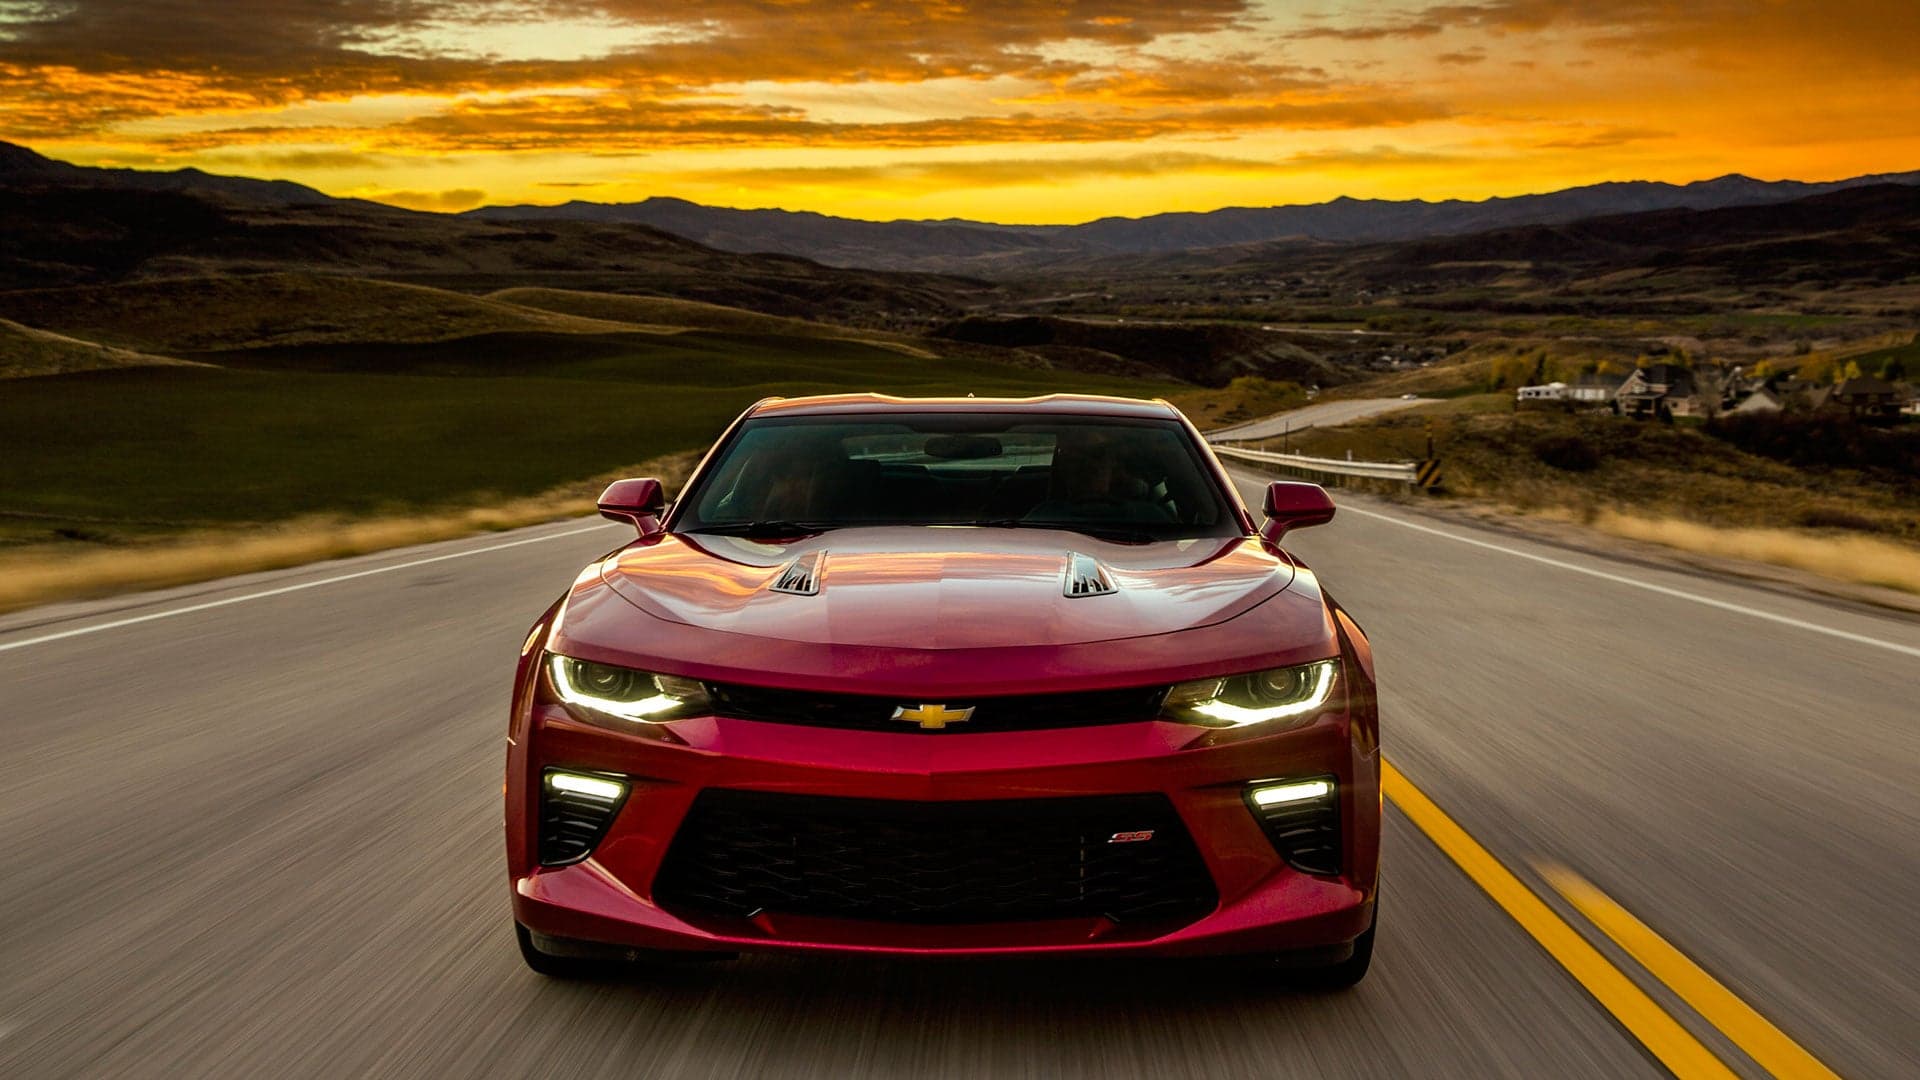 Chevrolet Is Sending Just 18 Camaros to Great Britain This Year